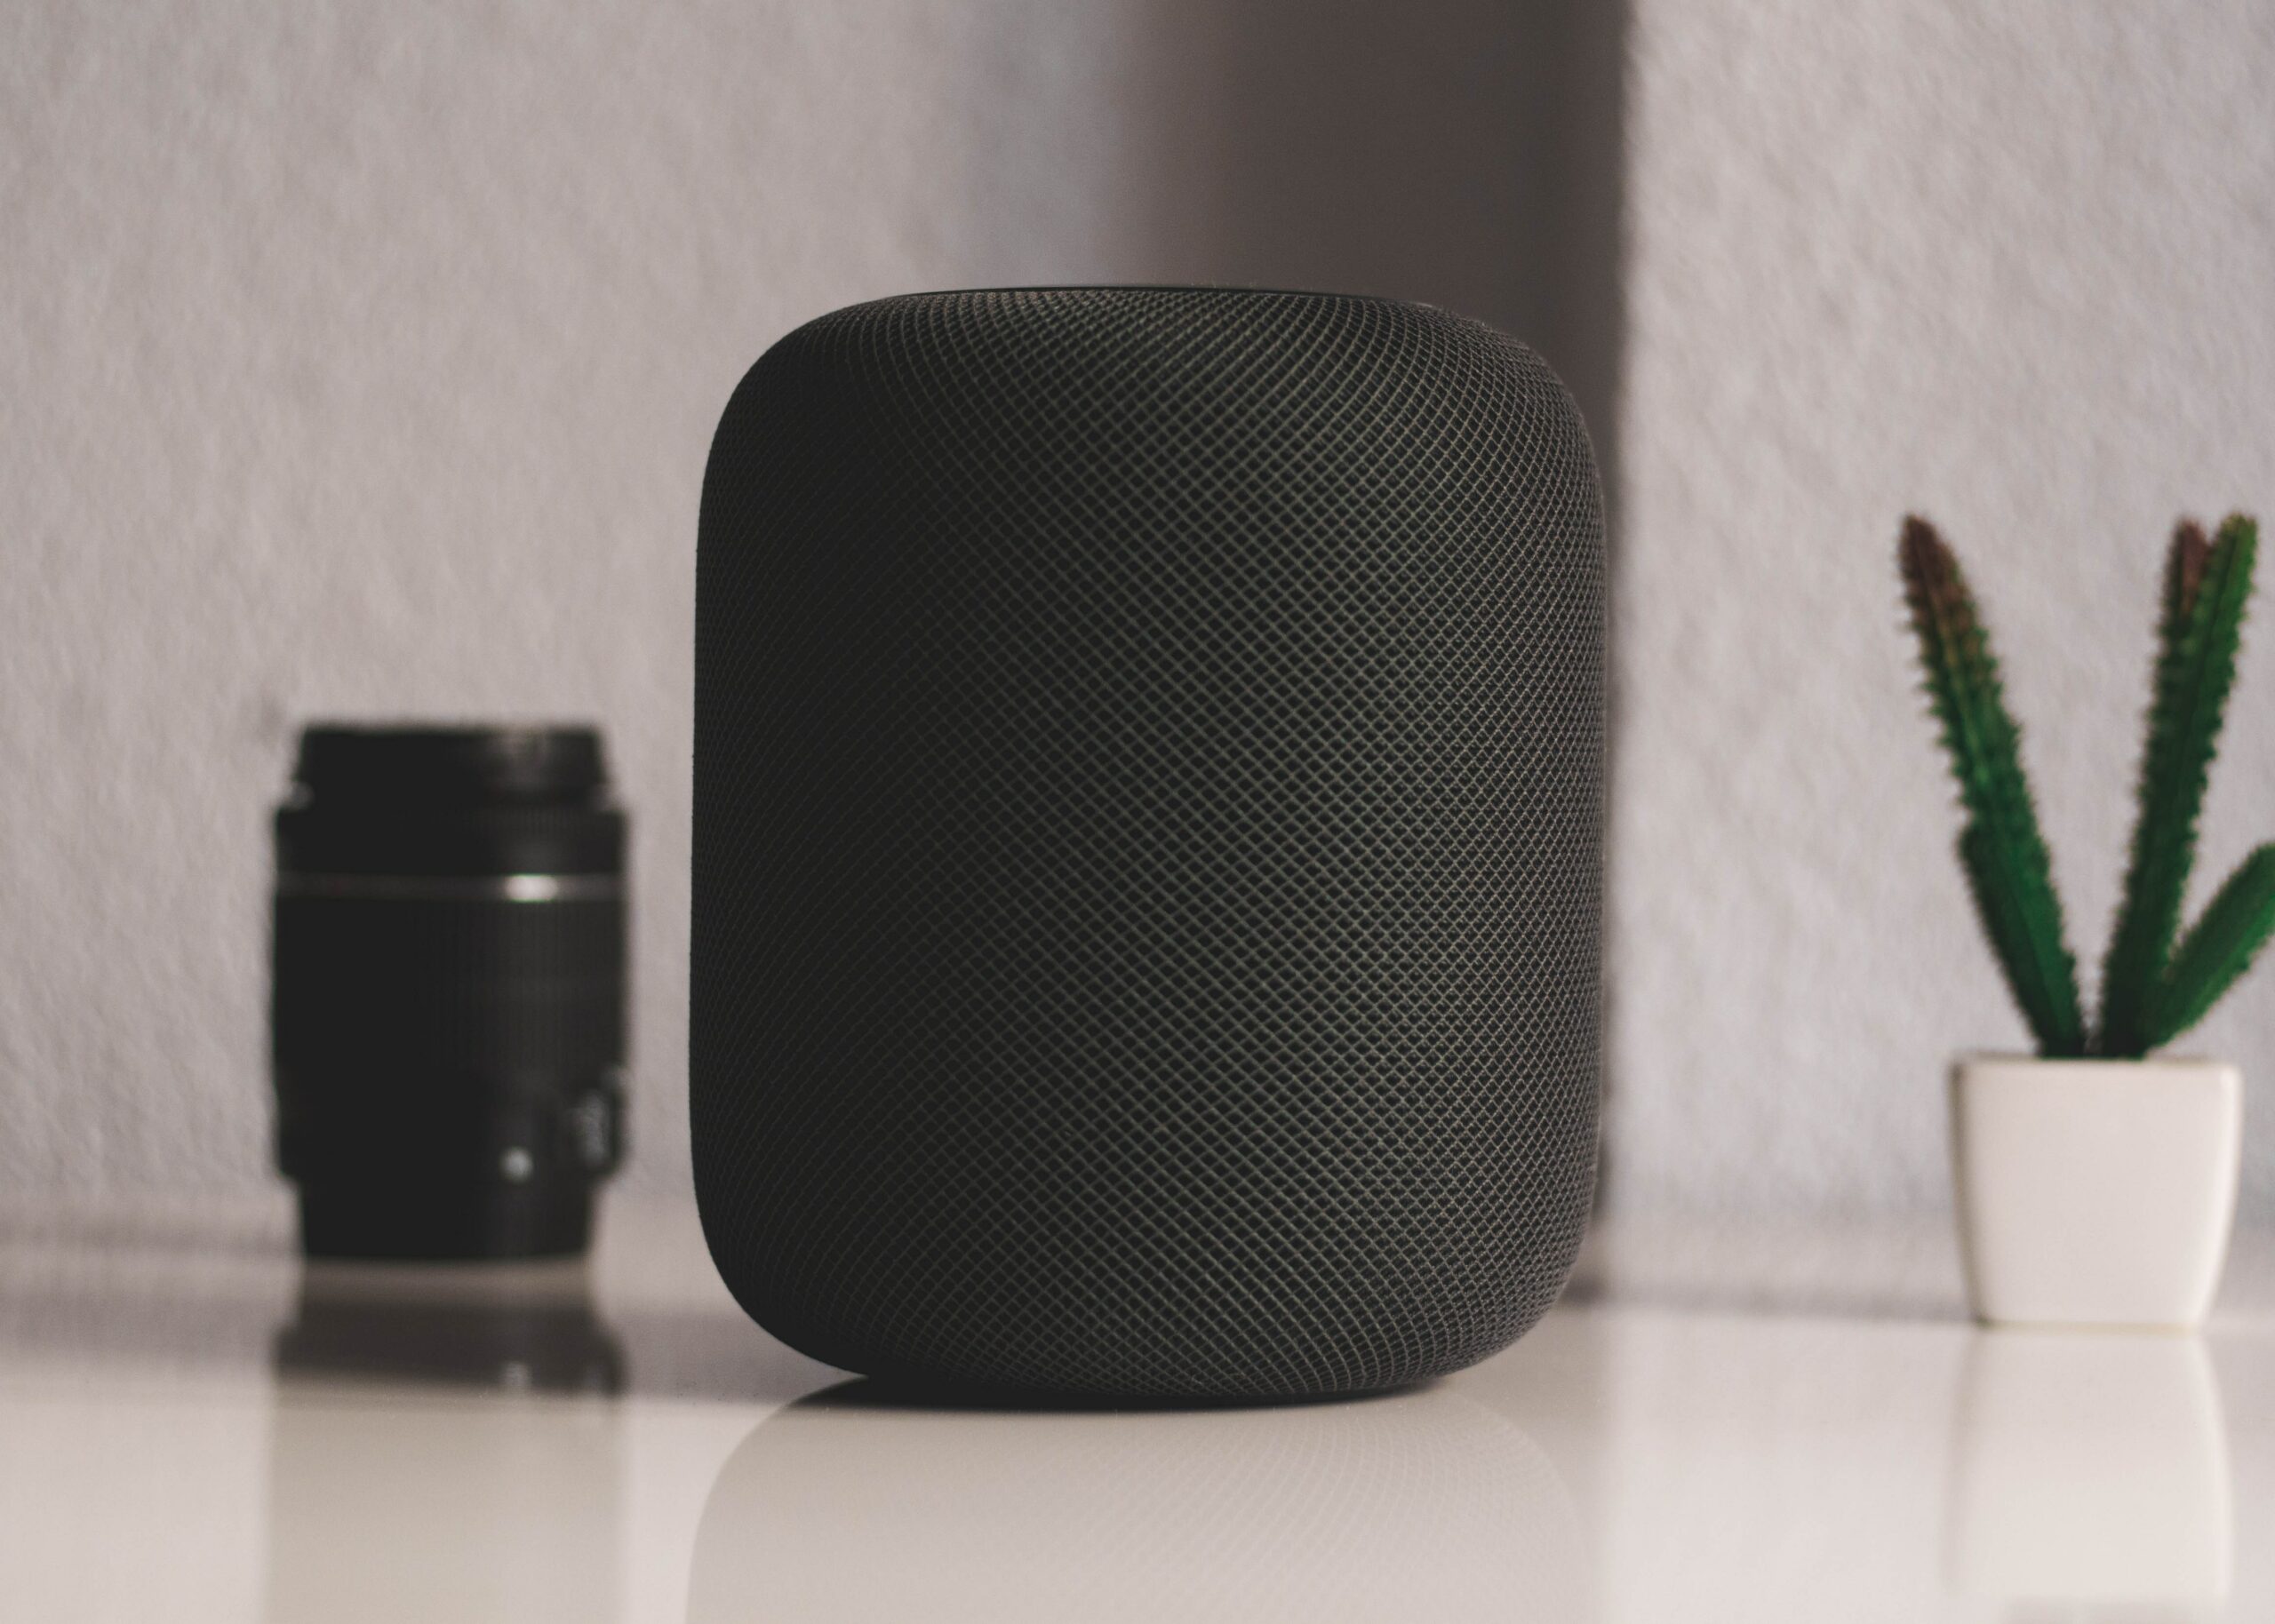 How to Play Ambient Sounds on HomePod & HomePod Mini